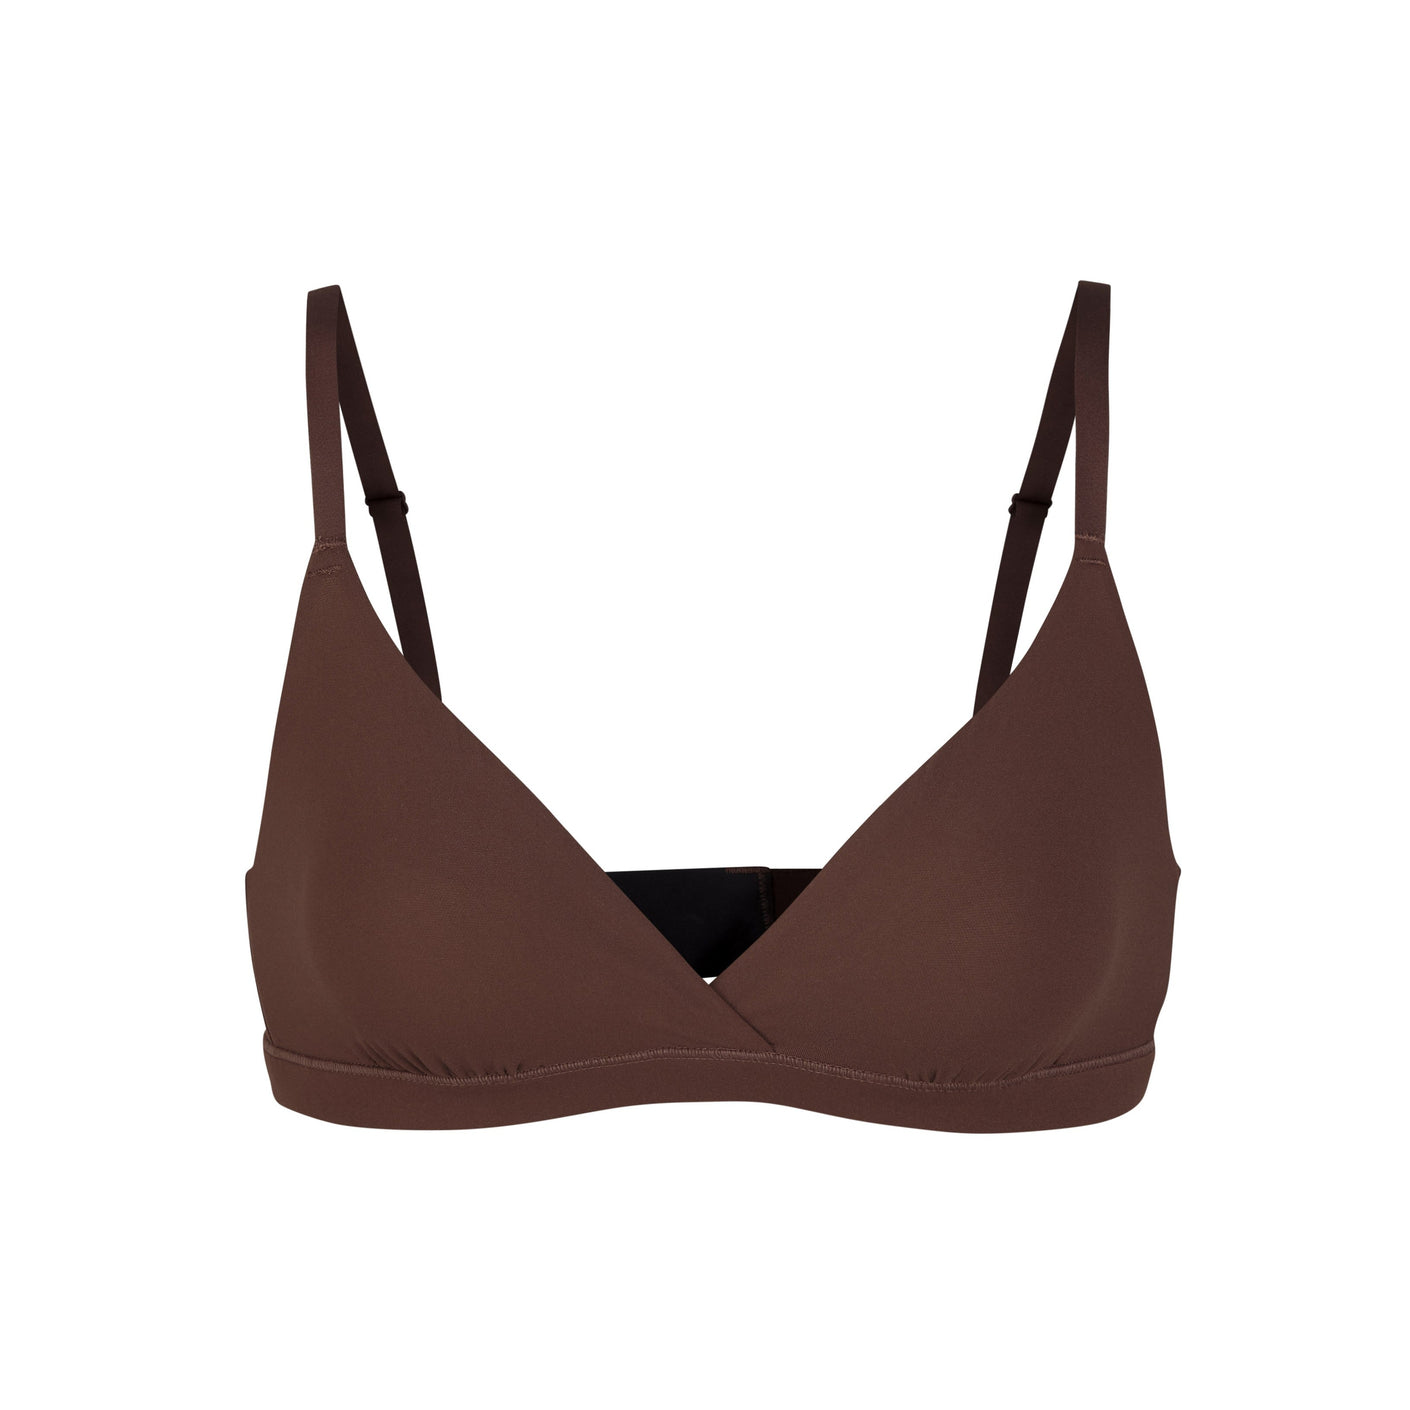 SKIMS - FITS EVERYBODY CROSSOVER BRALETTE Tan - $19 (44% Off Retail) - From  Sophie